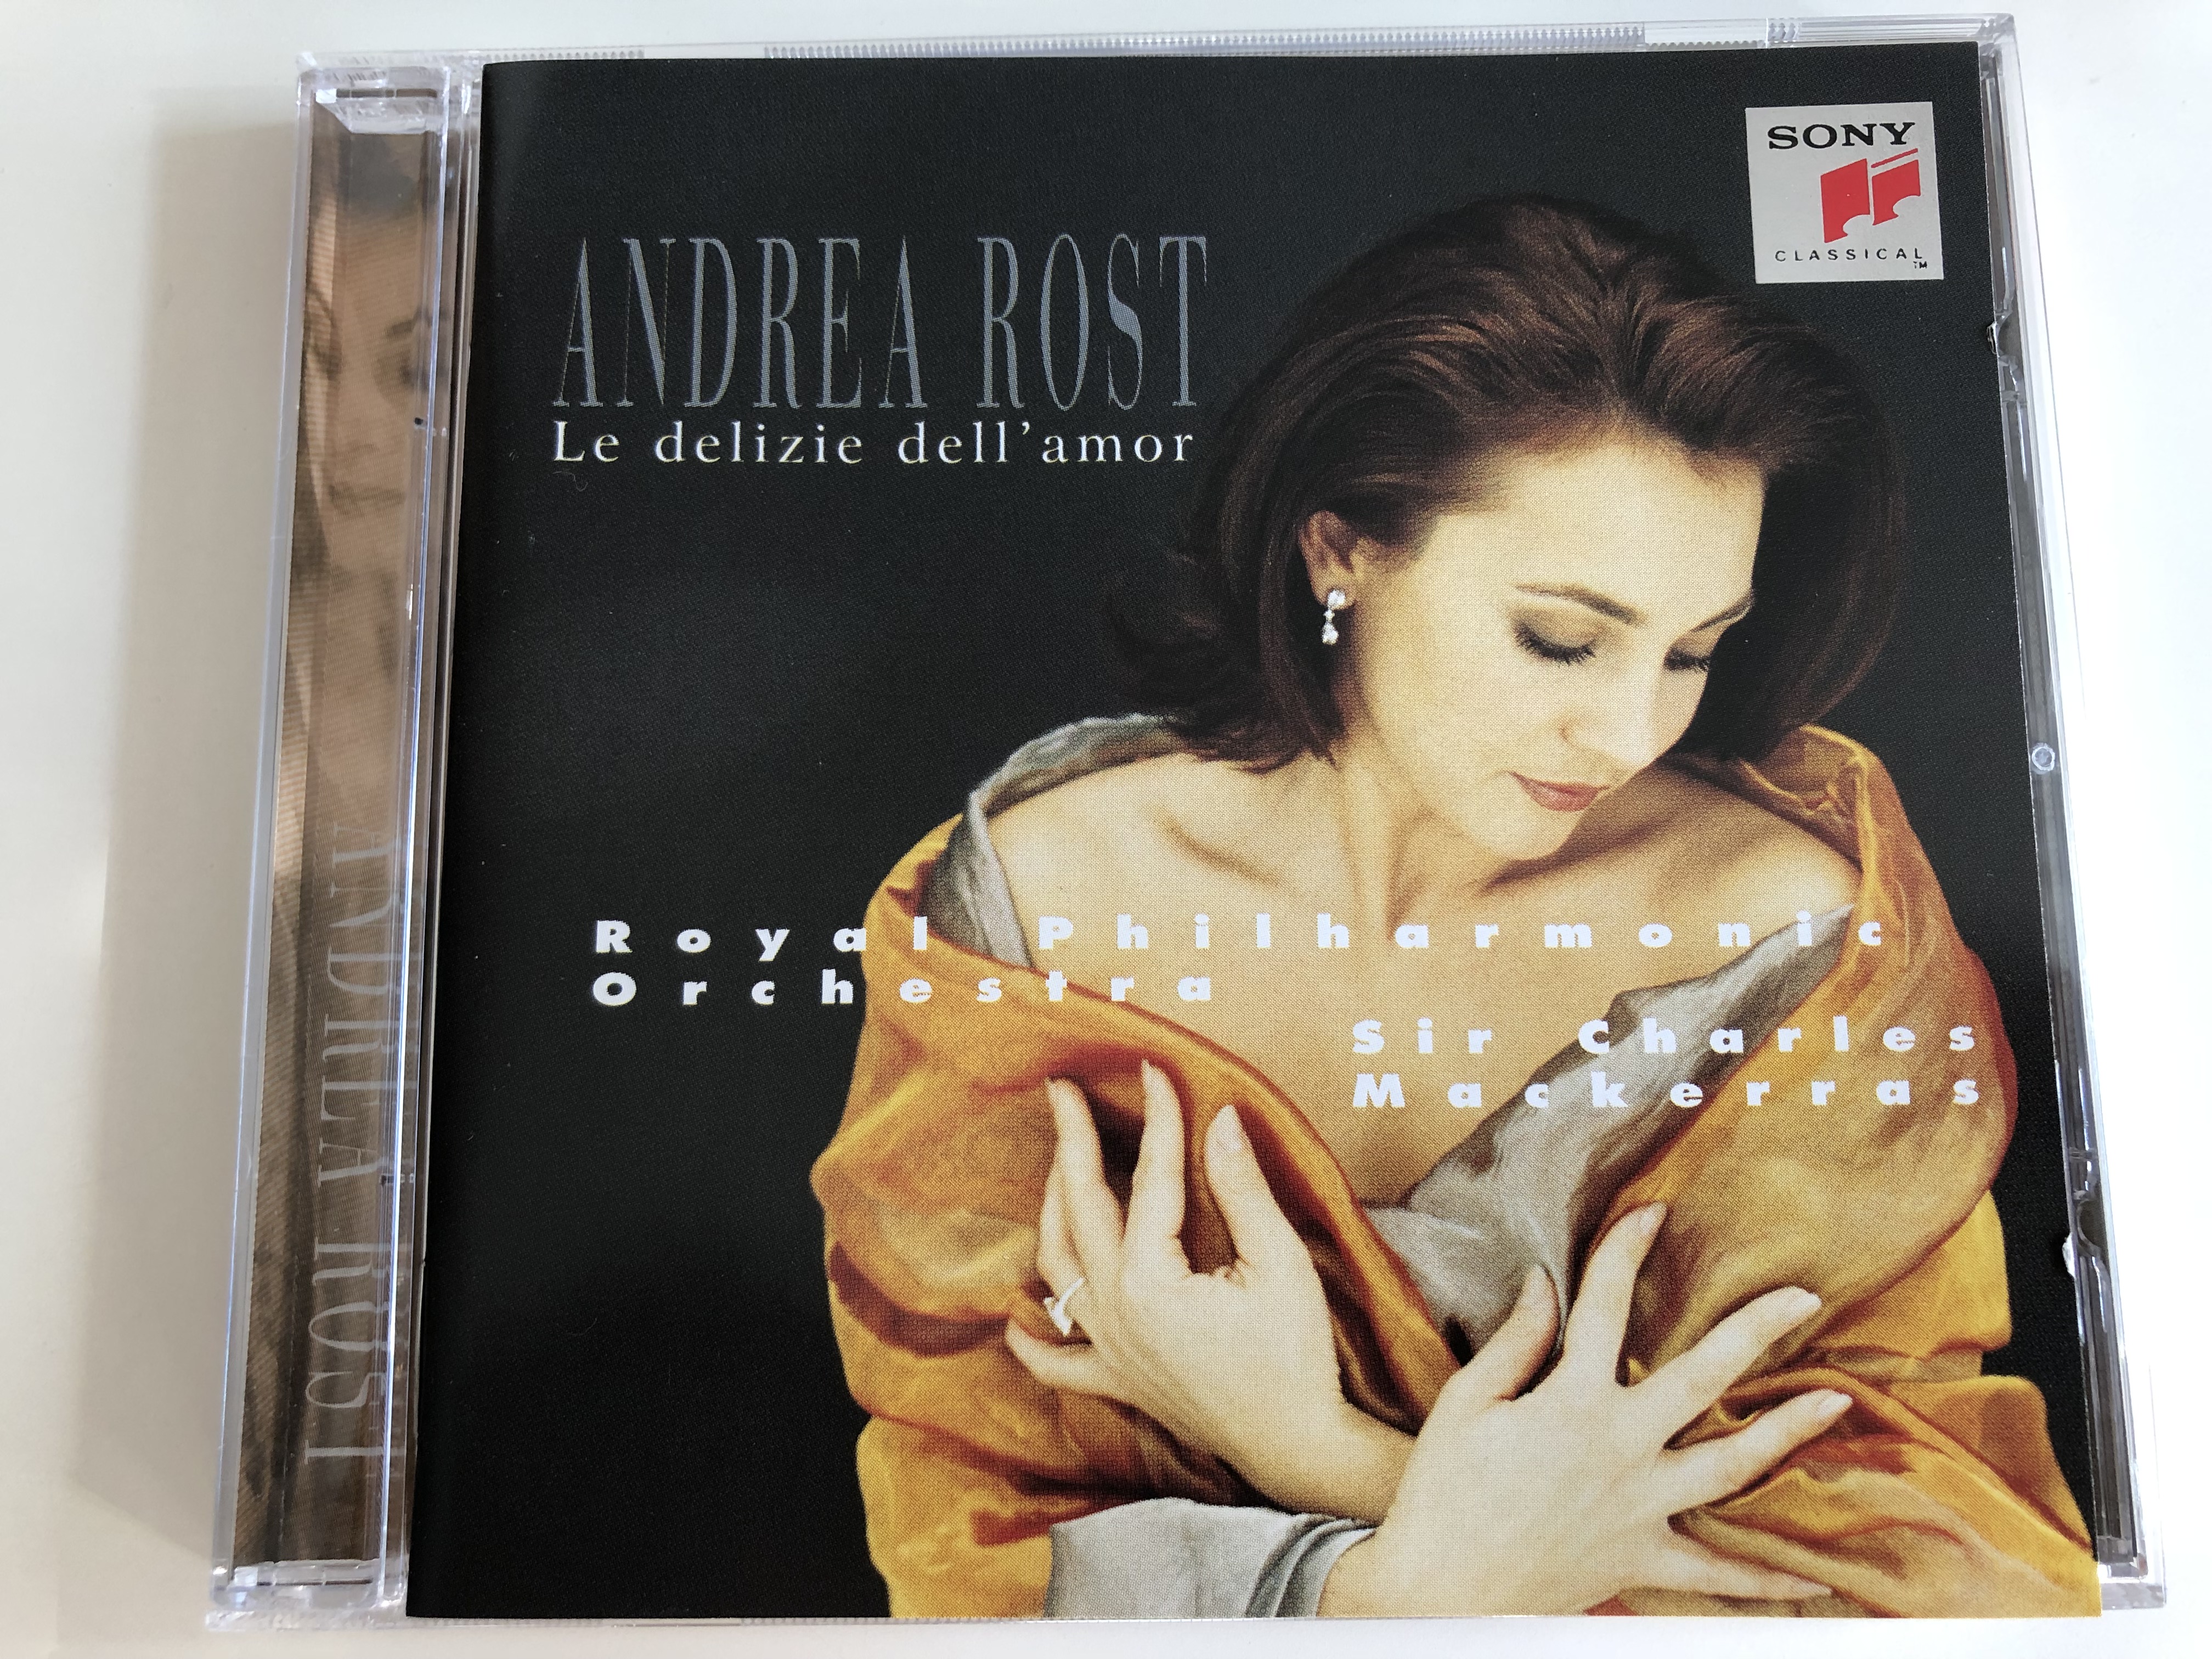 andrea-rost-le-delizie-dell-amor-royal-philharmonic-orchestra-sir-charles-mackerras-sony-classical-audio-cd-1997-sk-62789-1-.jpg